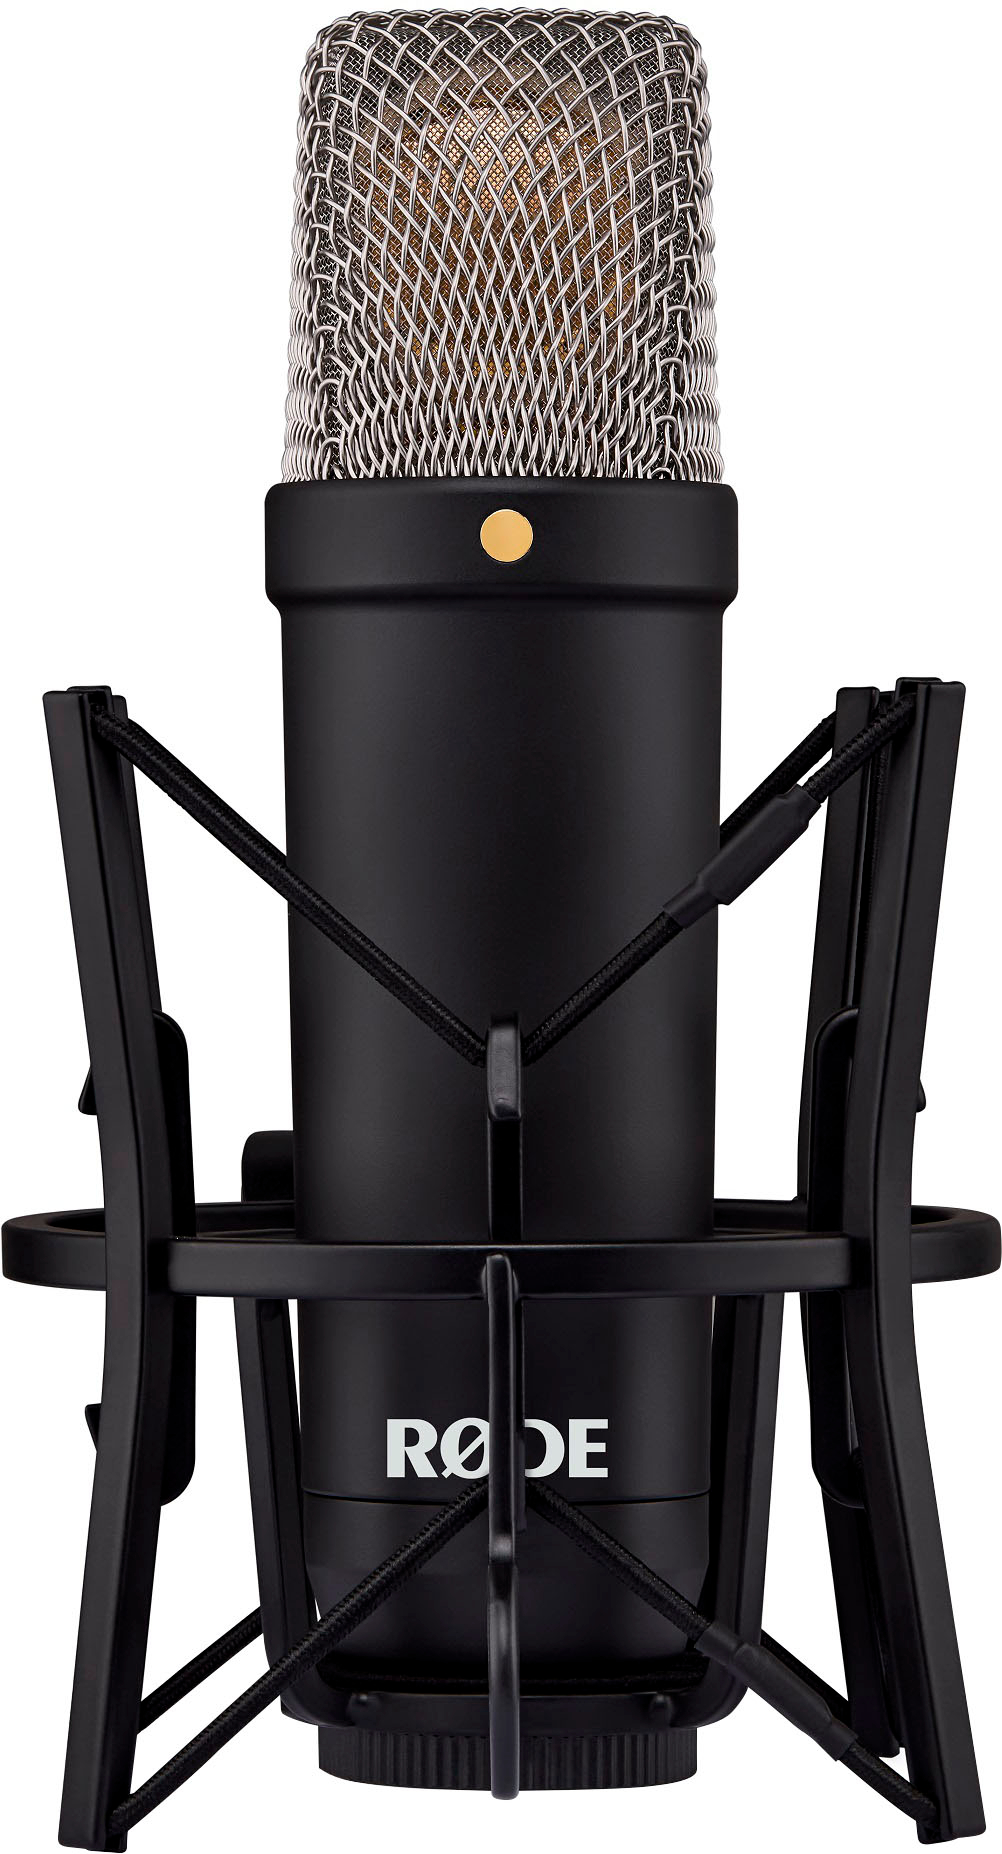 Rode NT1-A Condenser Wired Professional Microphone for sale online